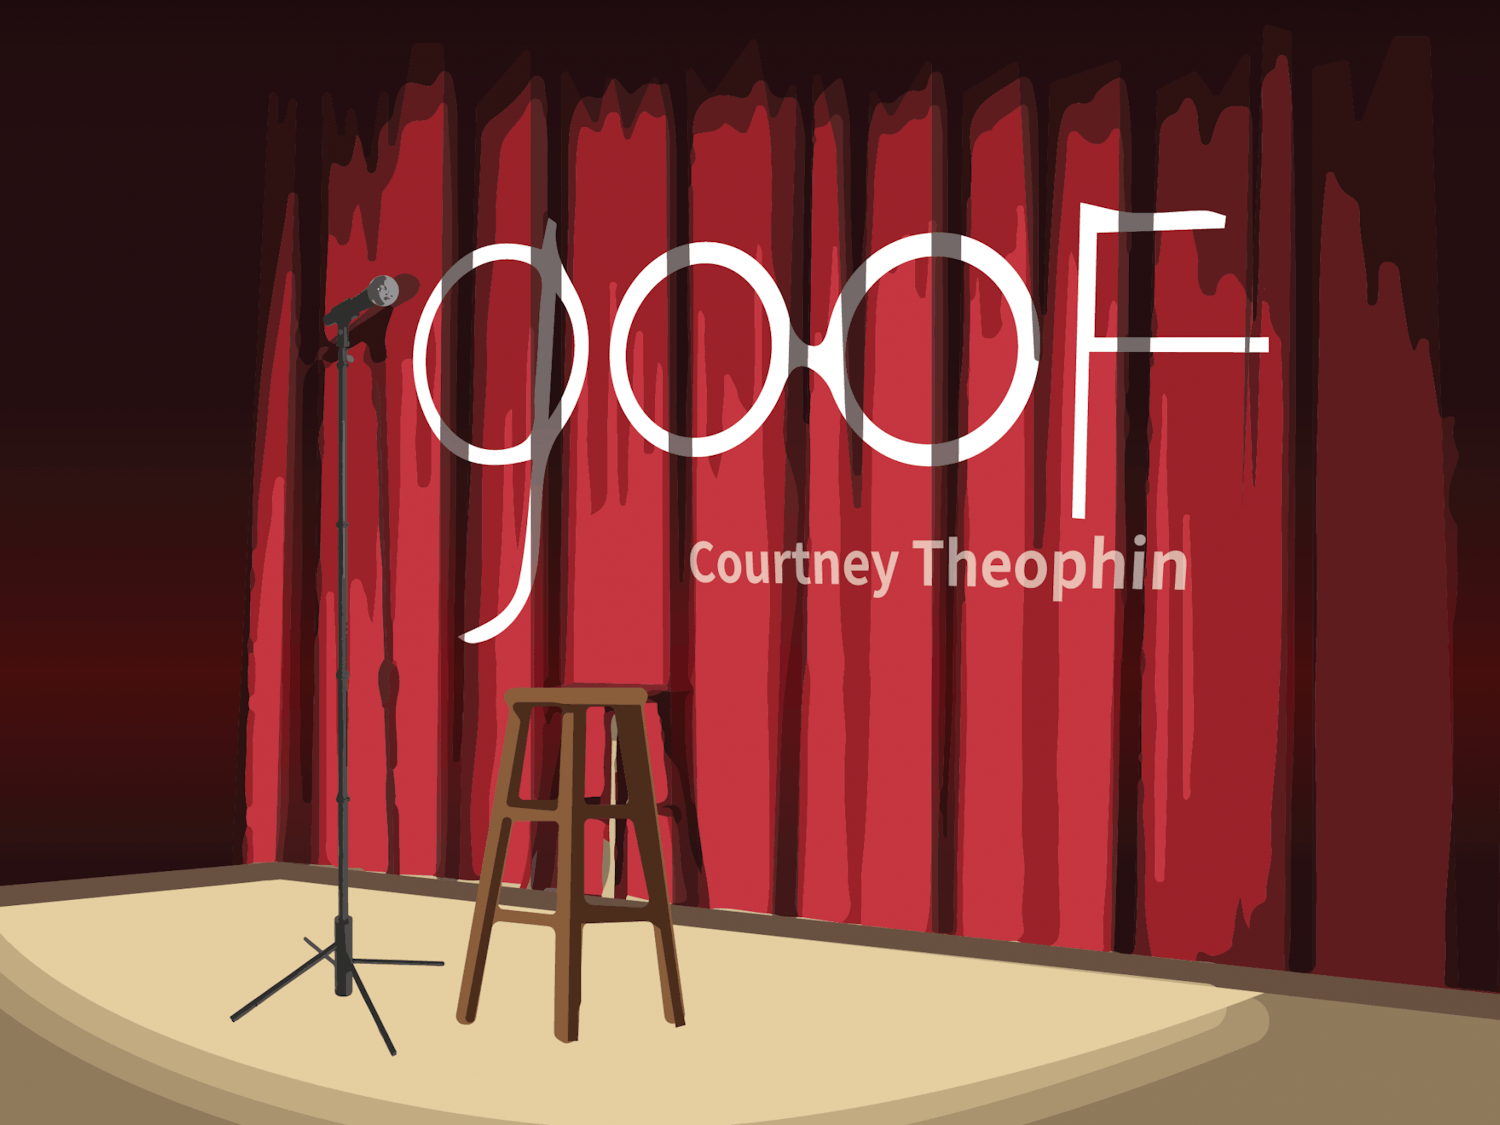 Brothers Courtney and Kenneth Theophin founded Goof Entertainment after a childhood spent creating comedy sketches. 